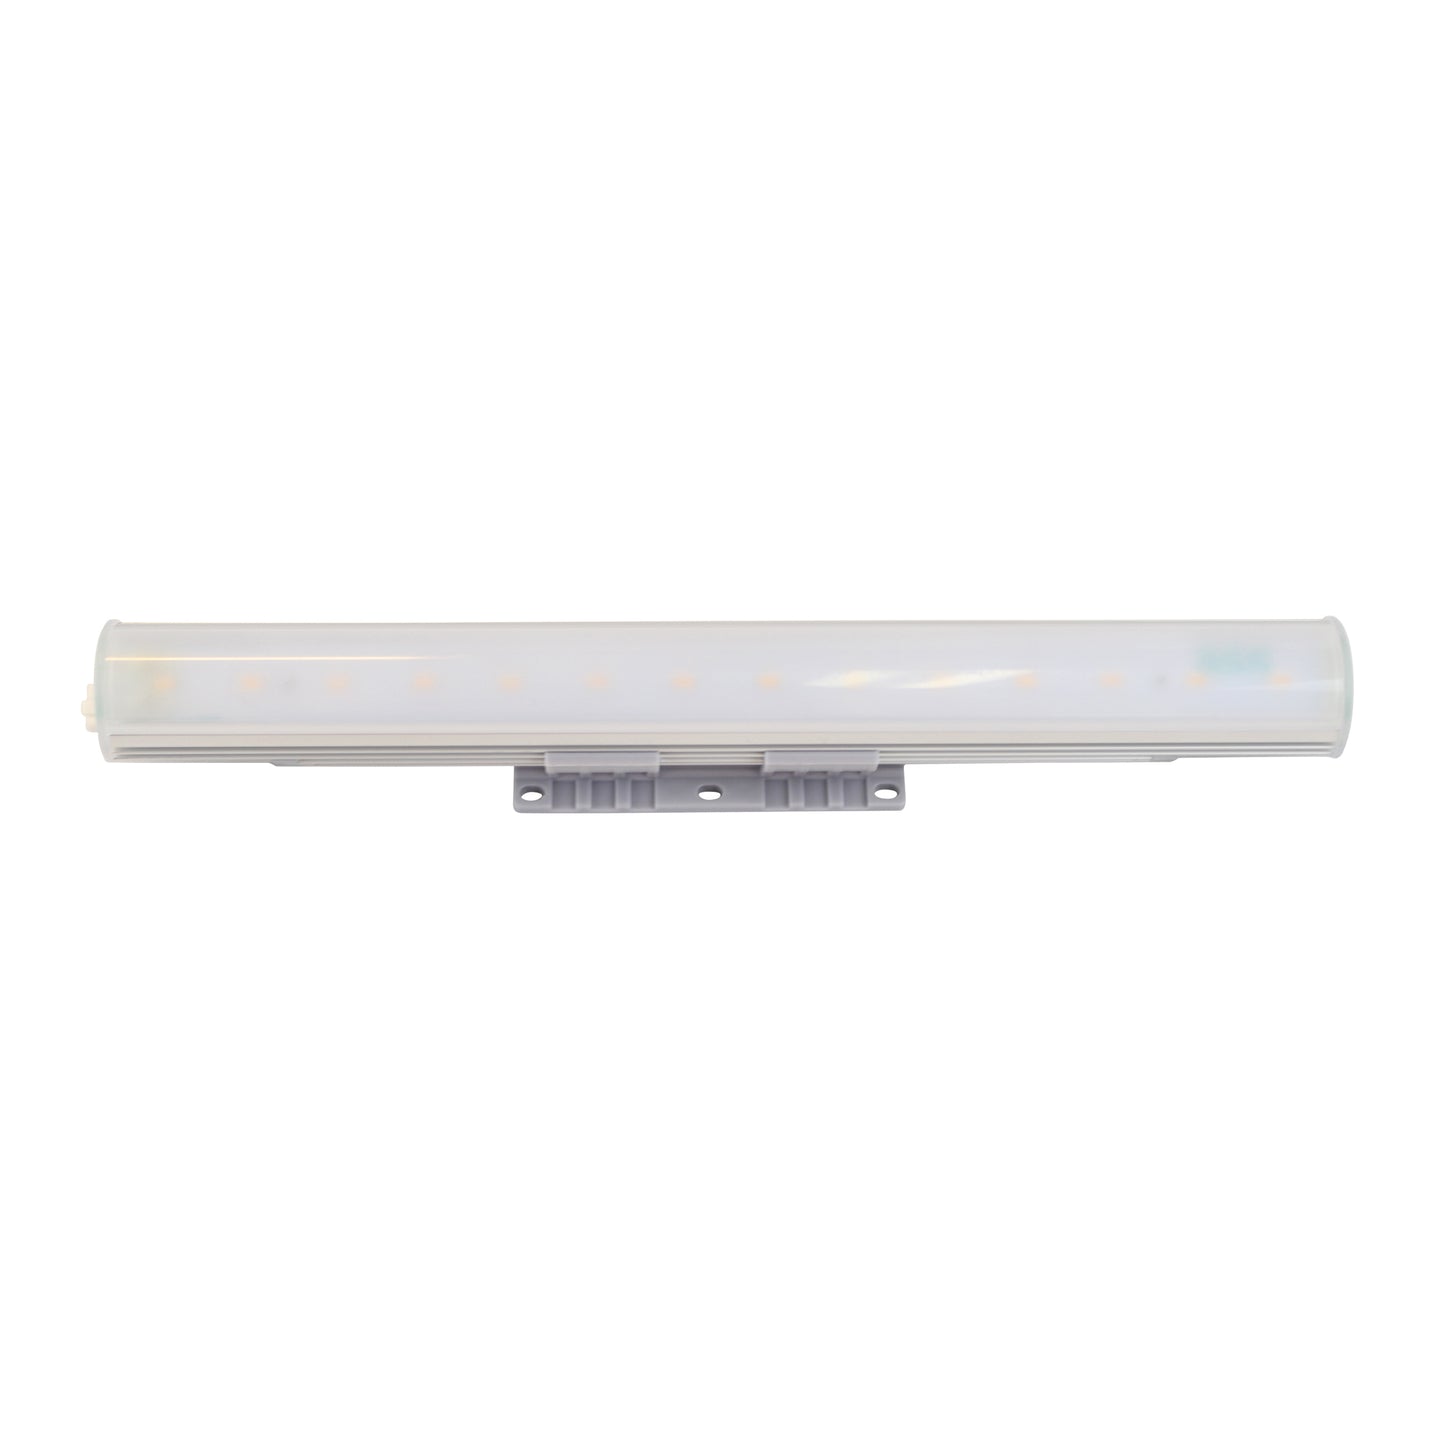 Solid State Luminaire ECVLX